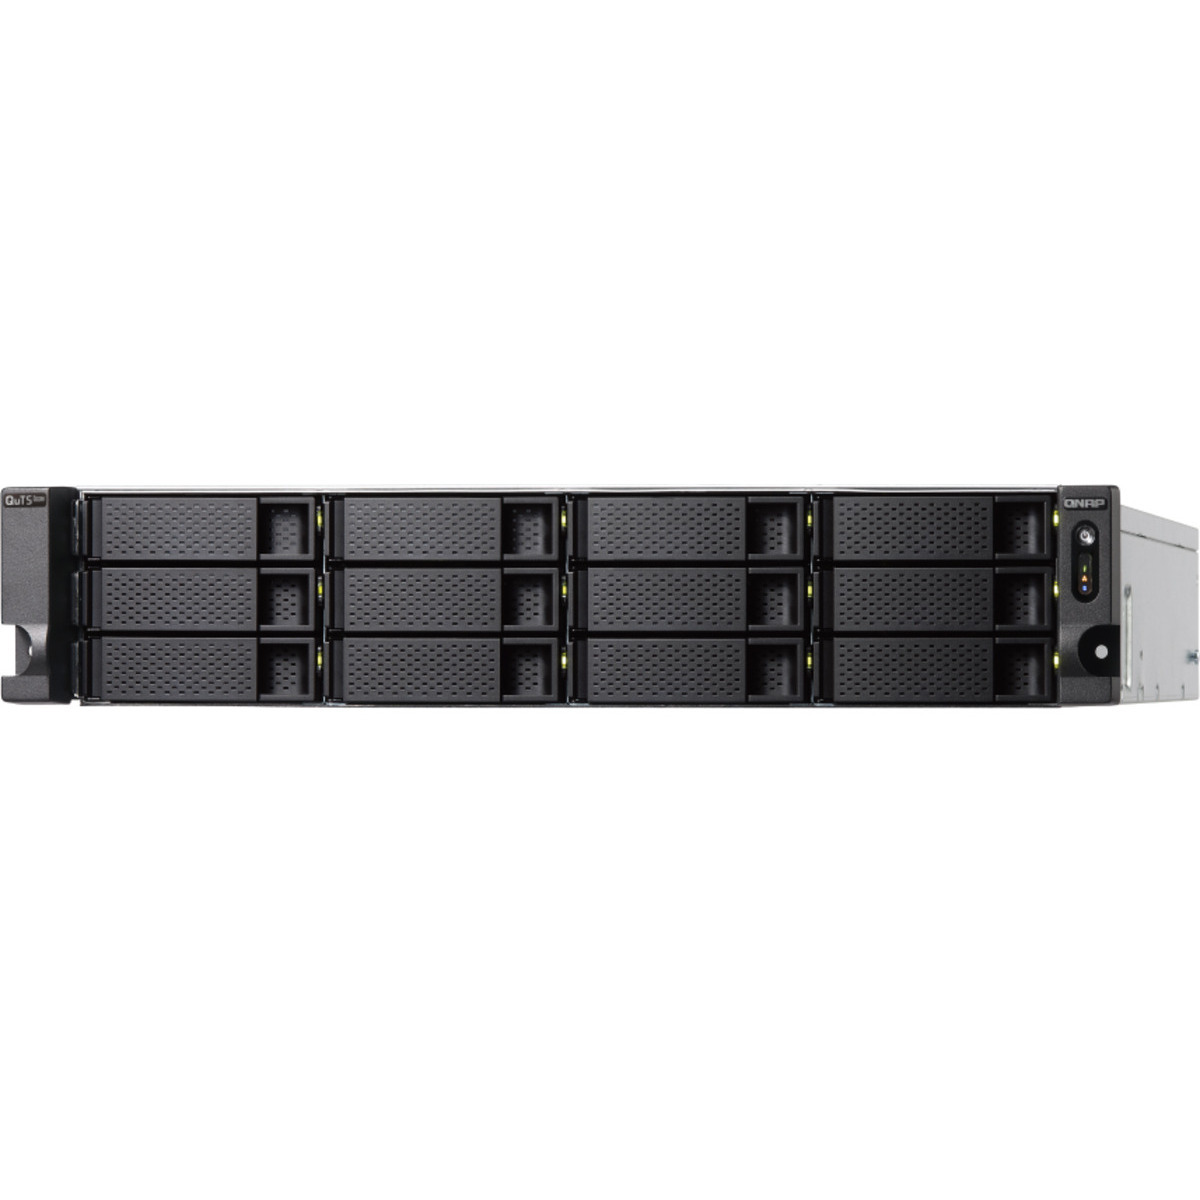 QNAP TS-h1886XU-RP R2 QuTS hero Edition 6tb 12+6-Bay RackMount Large Business / Enterprise NAS - Network Attached Storage Device 12x500gb Western Digital Red SA500 WDS500G1R0A 2.5 560/530MB/s SATA 6Gb/s SSD NAS Class Drives Installed - Burn-In Tested TS-h1886XU-RP R2 QuTS hero Edition